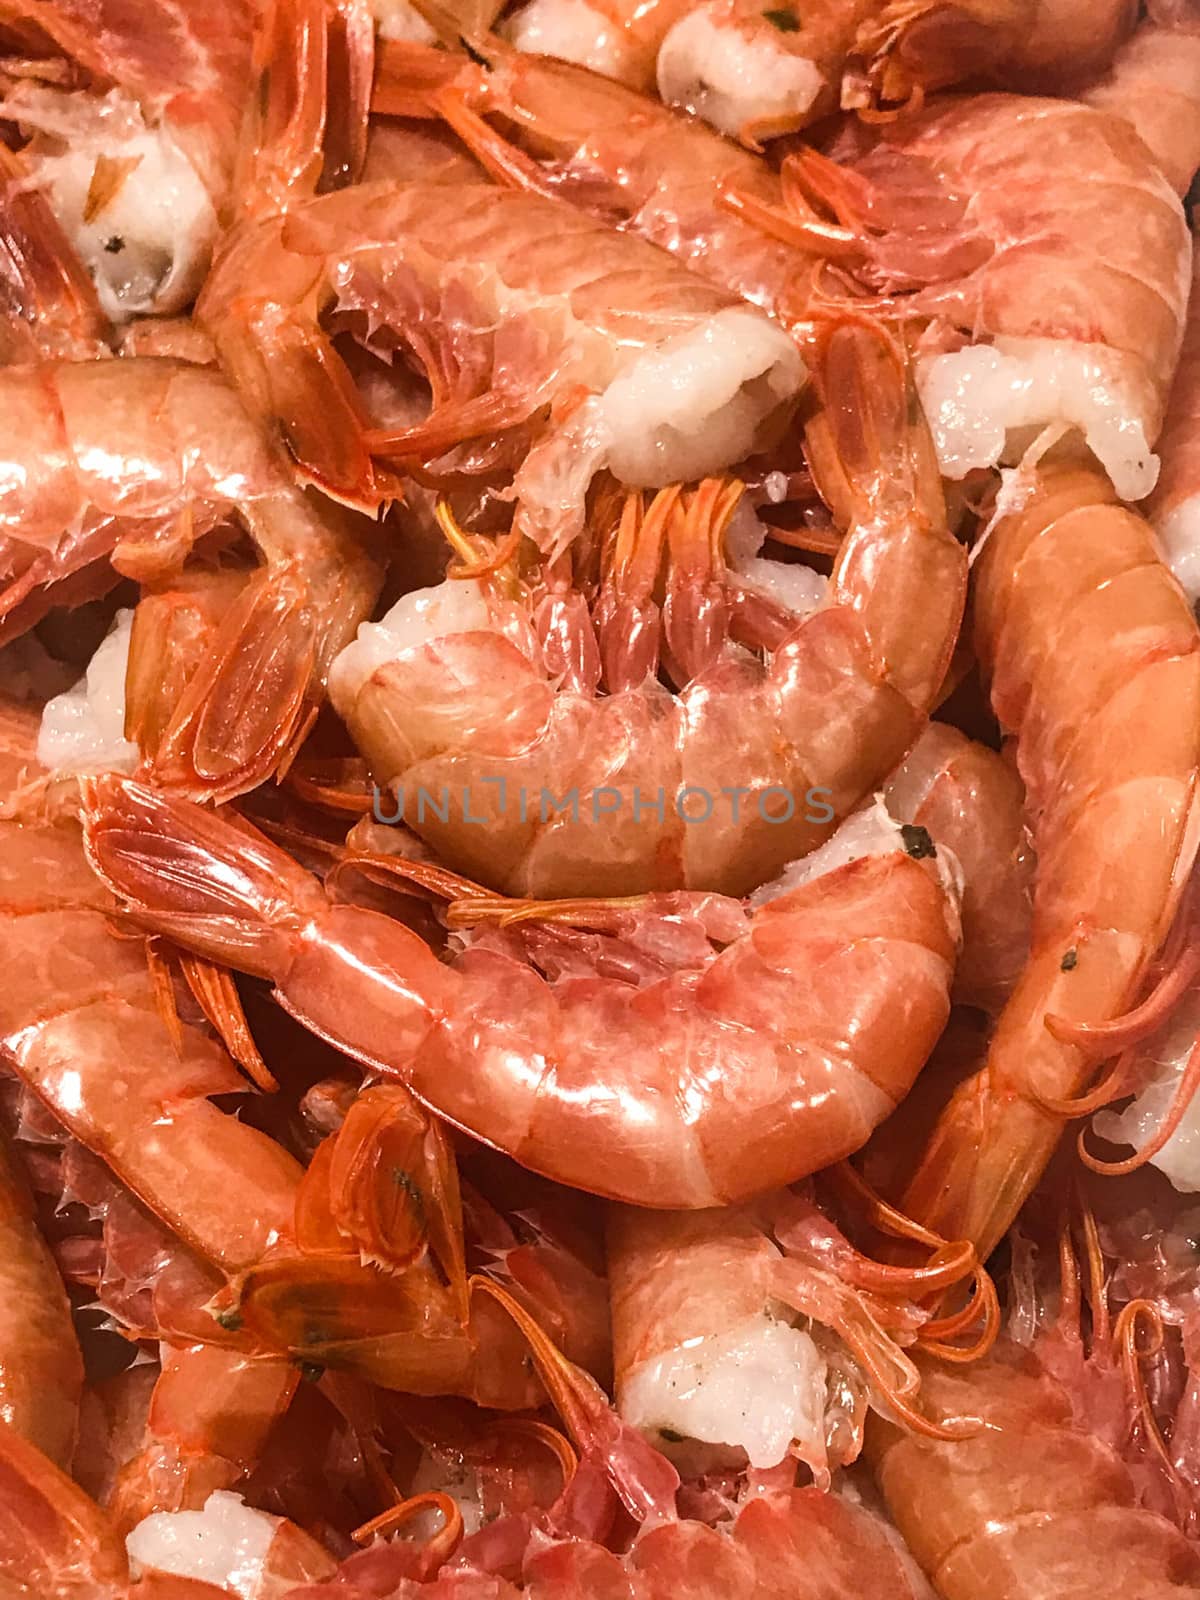 Shrimp tails in a fish shop by cosca